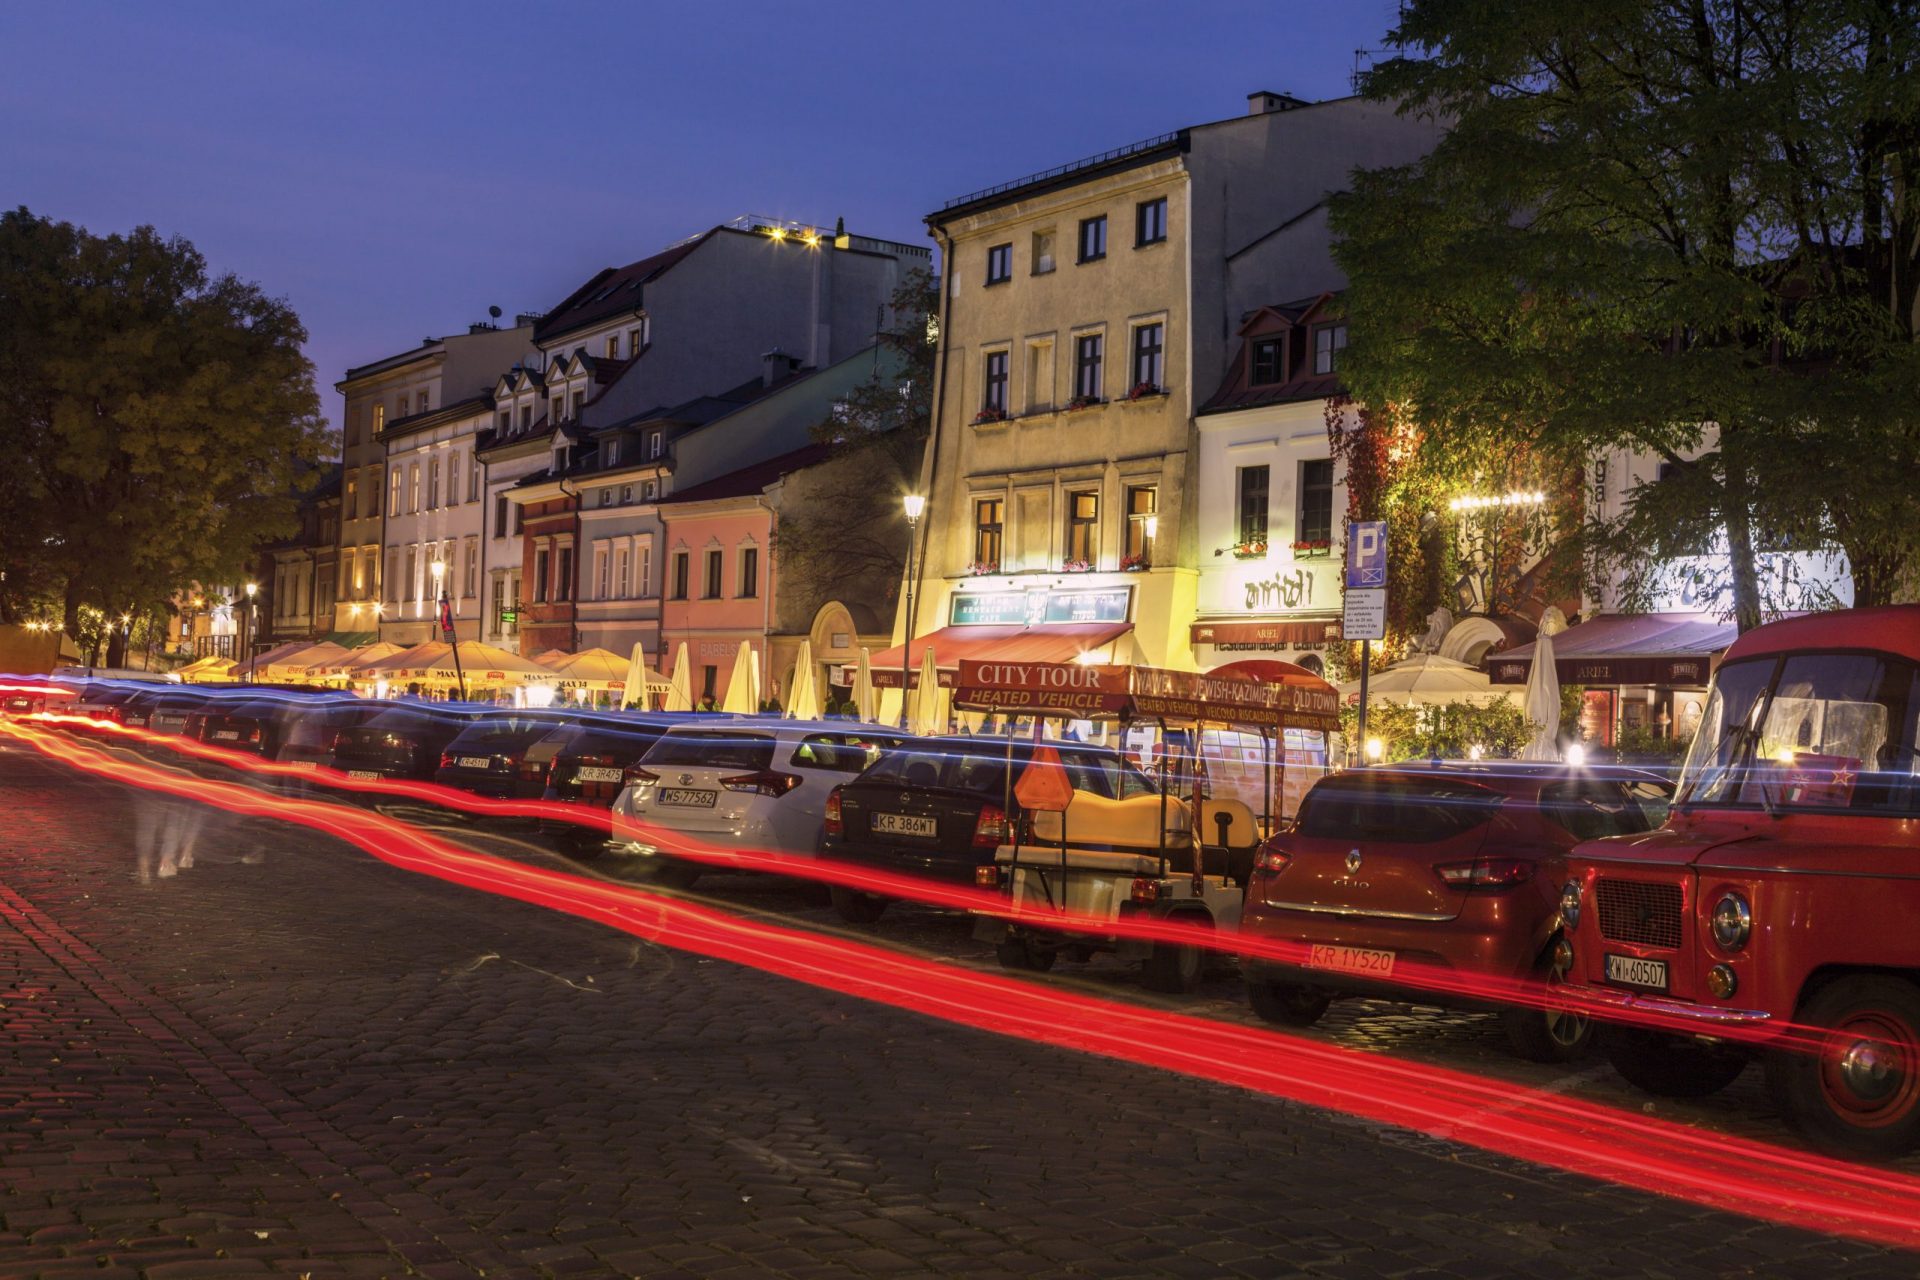 <p>In a completely different register, Krakow is renowned for its nightlife. In the Kazimierz district, you will find many trendy bars and restaurants. Take the opportunity to taste traditional Polish cuisine!</p> <p>The average price of one night in an Airbnb in Krakow is €66 ($71), according to 'Time Out.'</p>